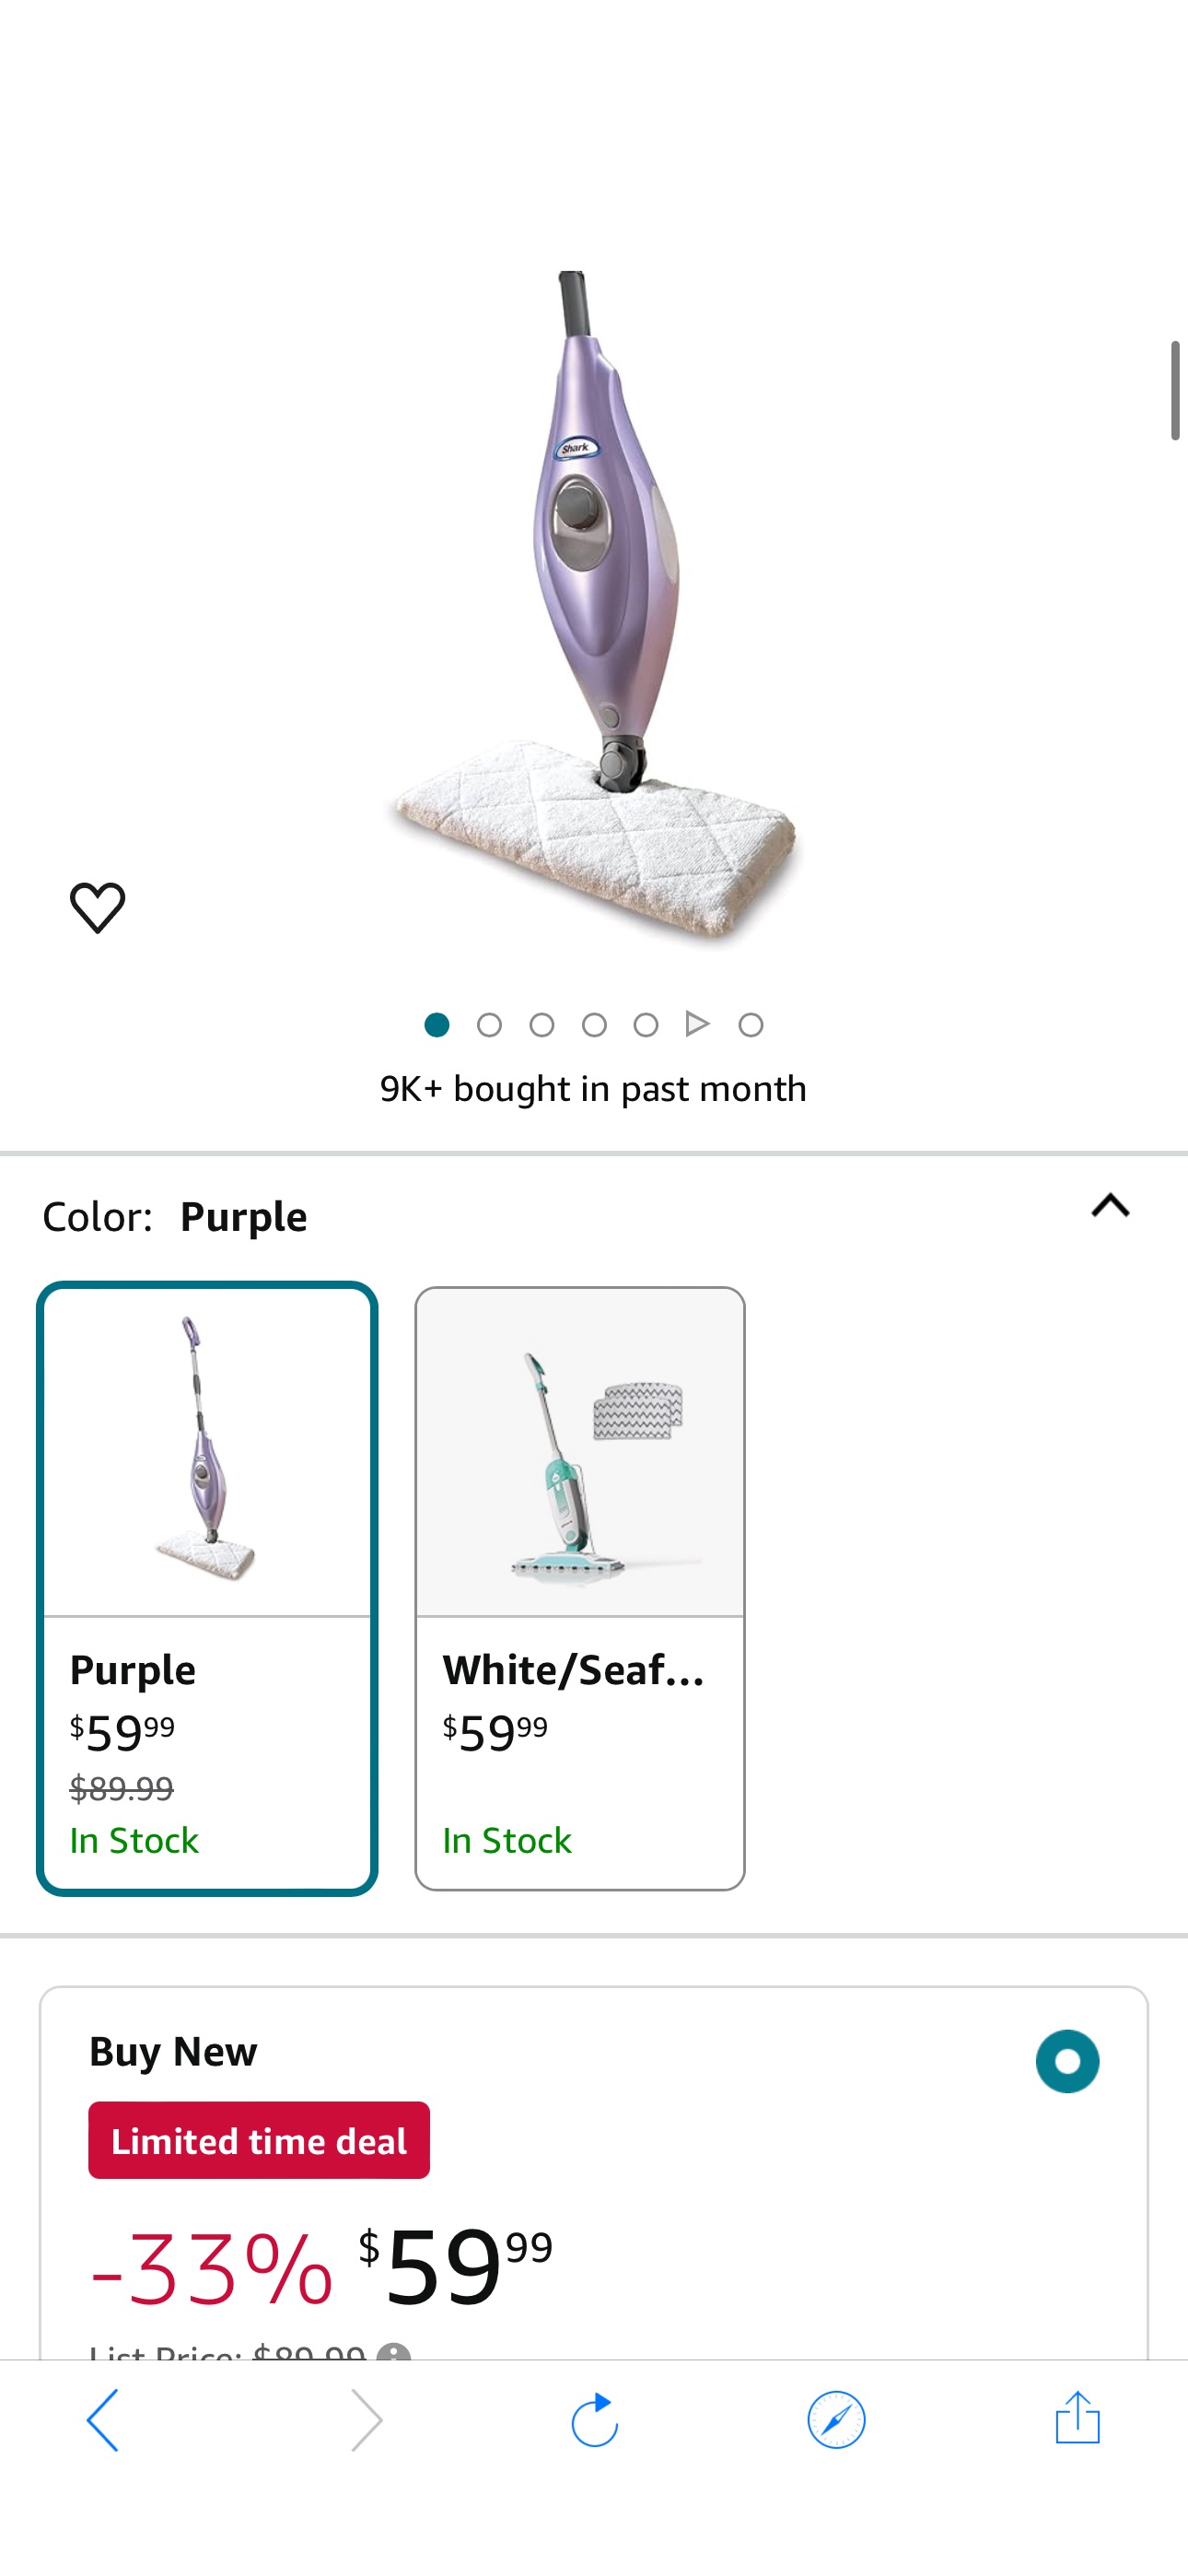 Amazon.com - Shark S3501 Steam Pocket Mop Hard Floor Cleaner, With Rectangle Head and 2 Washable Pads, Easy Maneuvering, Quick Drying, Soft-Grip Handle and Powerful Steam, Purple - Household Steam Mop